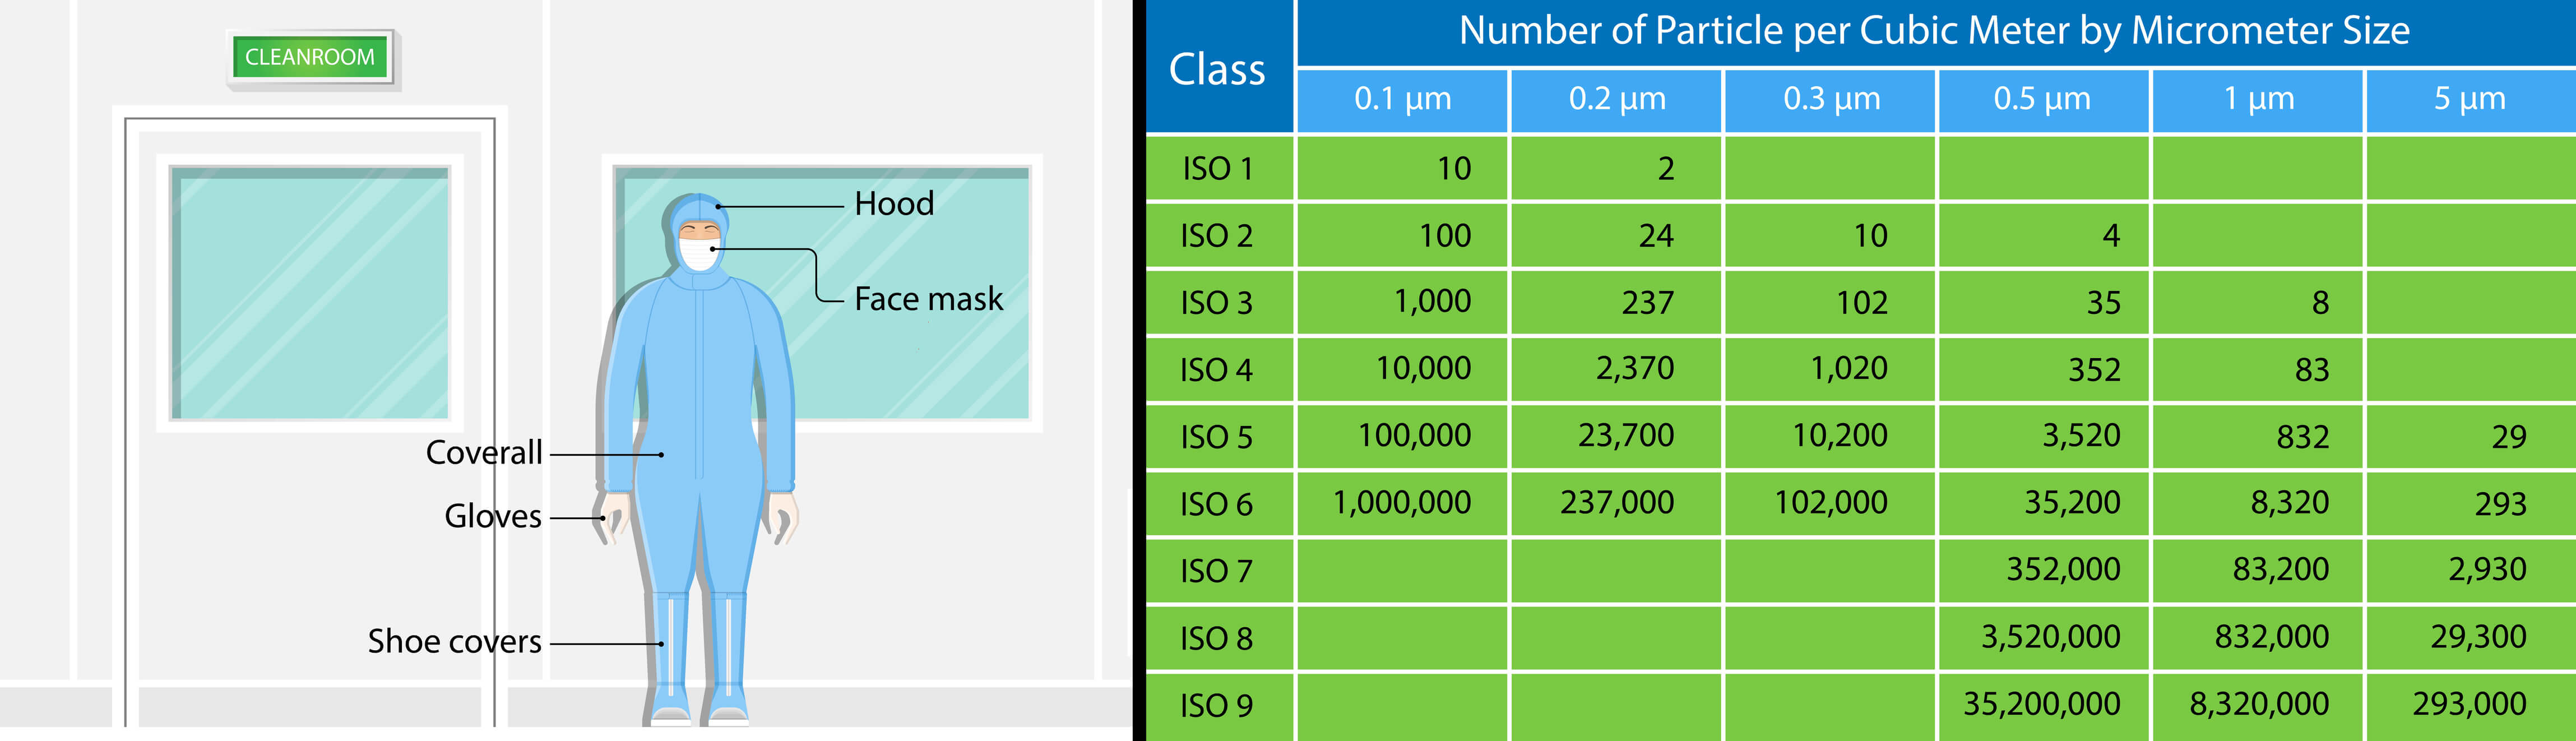 clearoom iso standards table